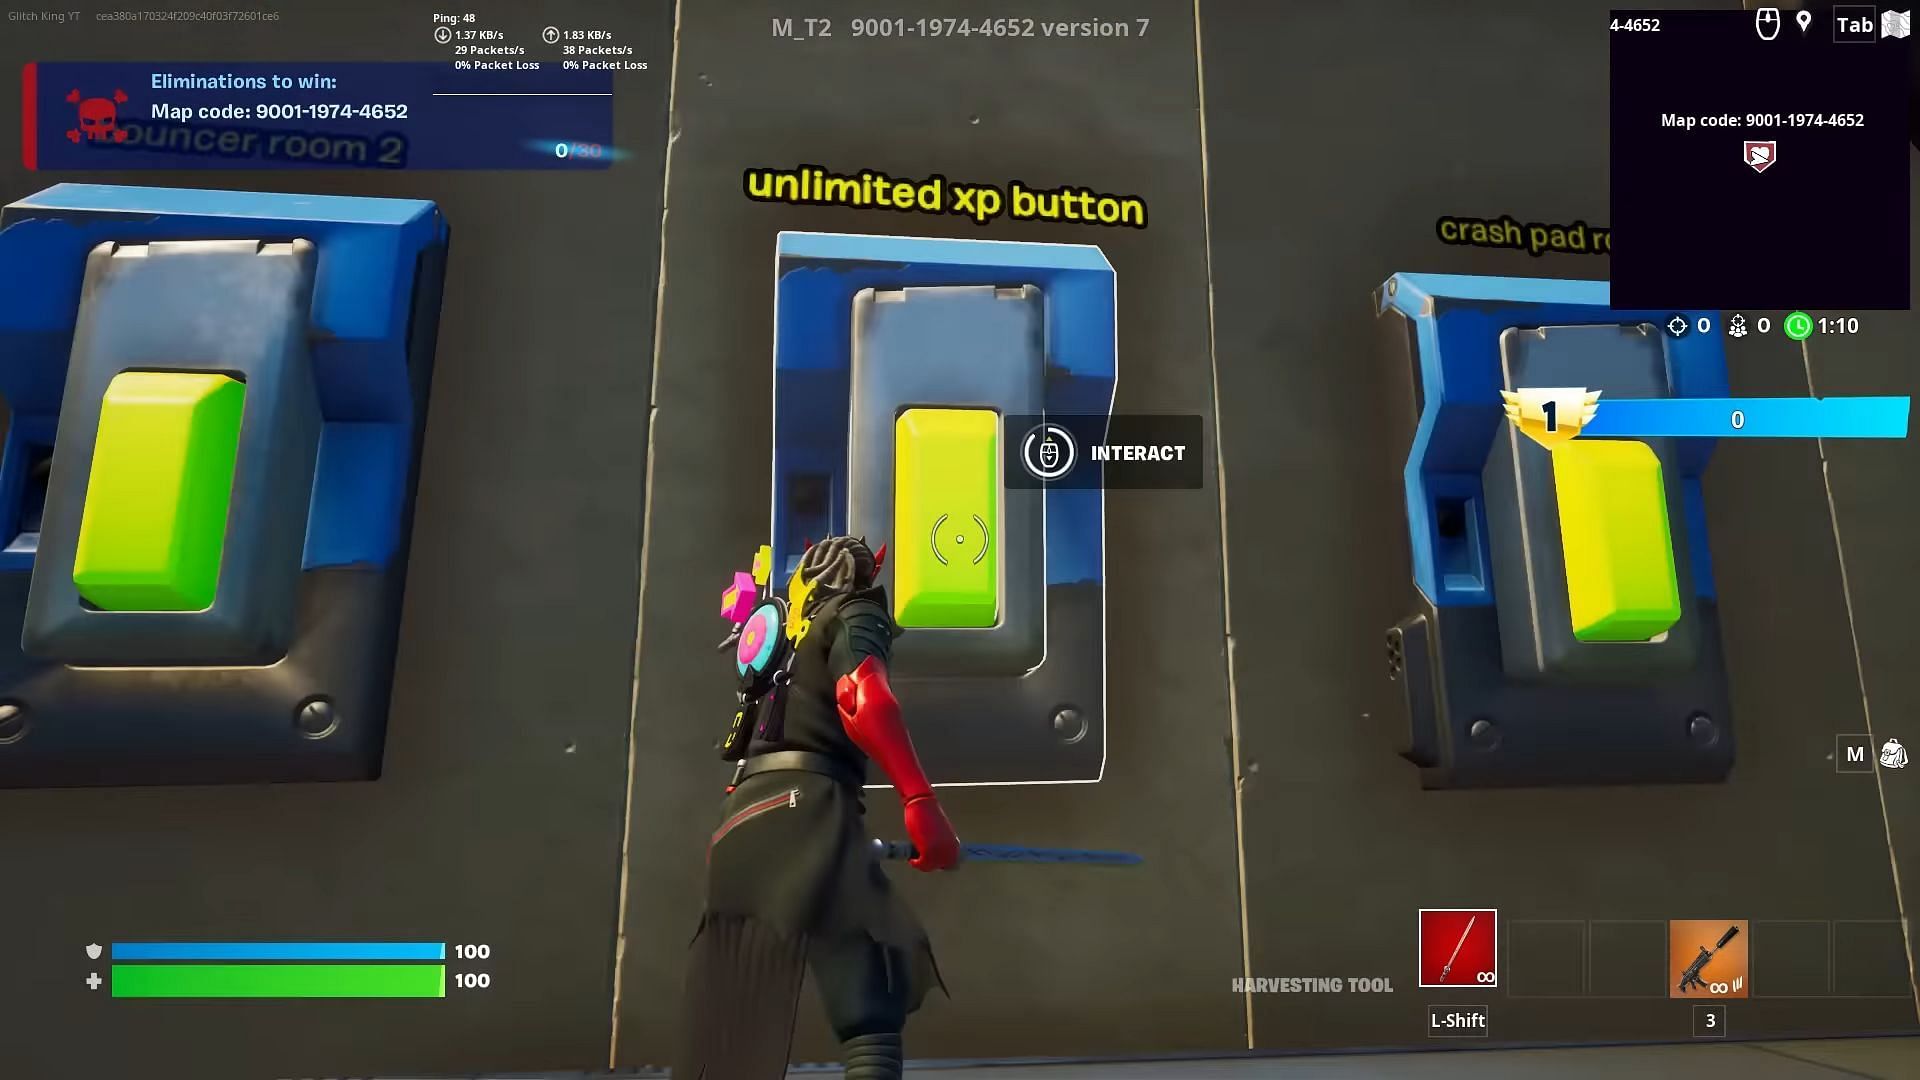 Interacting with the unlimited XP button will trigger the glitch (Image via Epic Games)